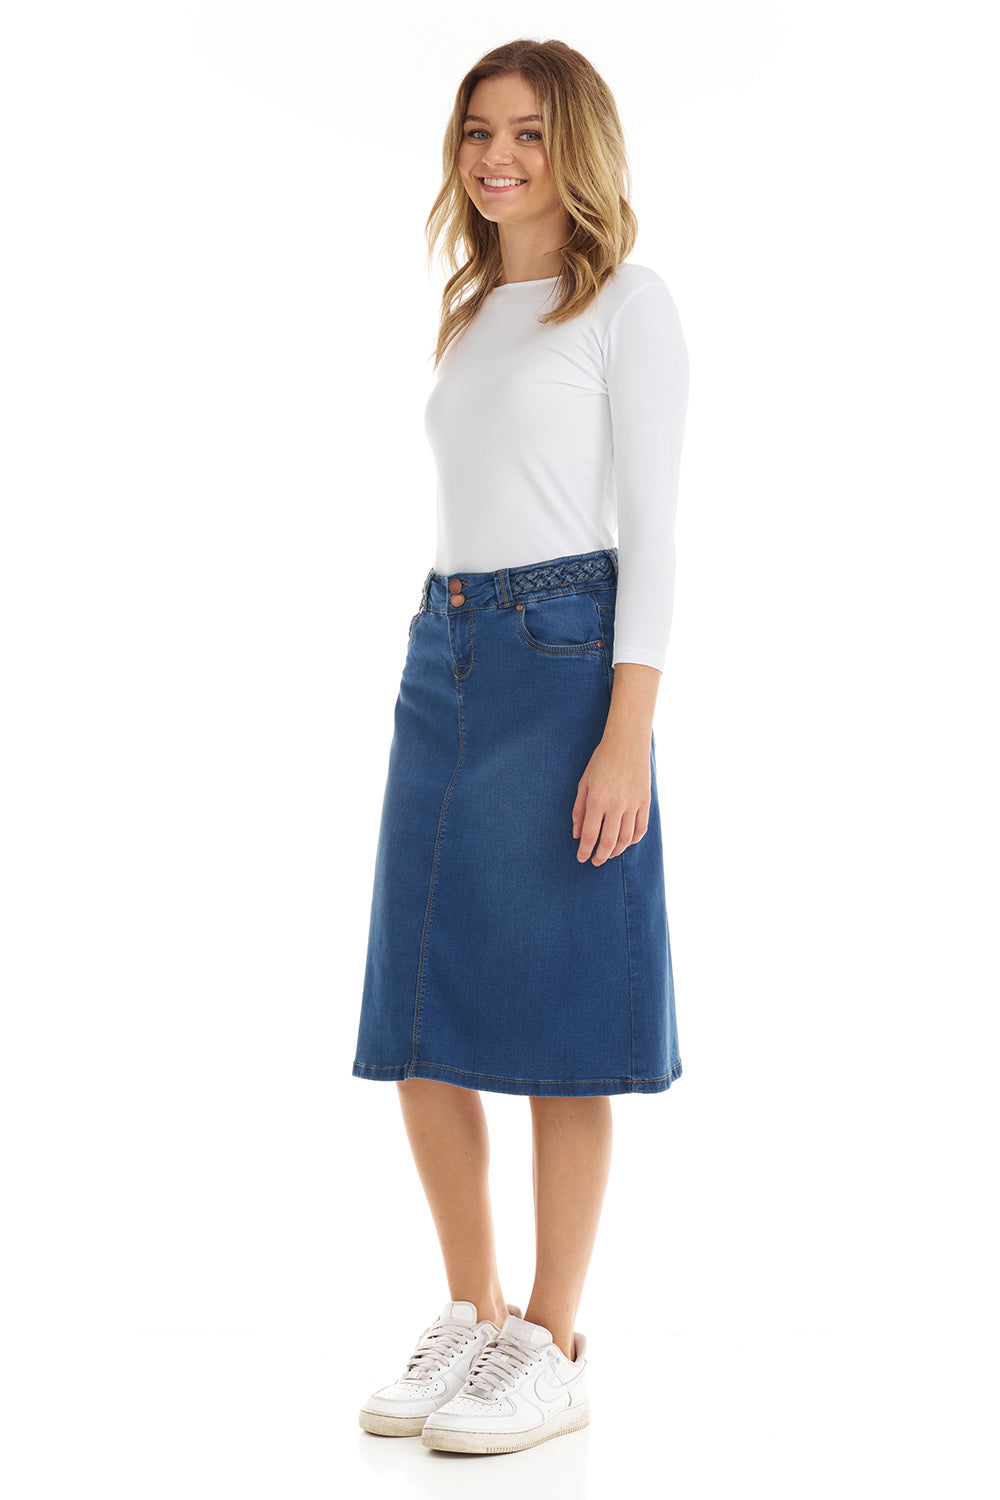 blue classic 5 pocket below the knee A-line denim jean skirt with contrast stitching and woven braided belt